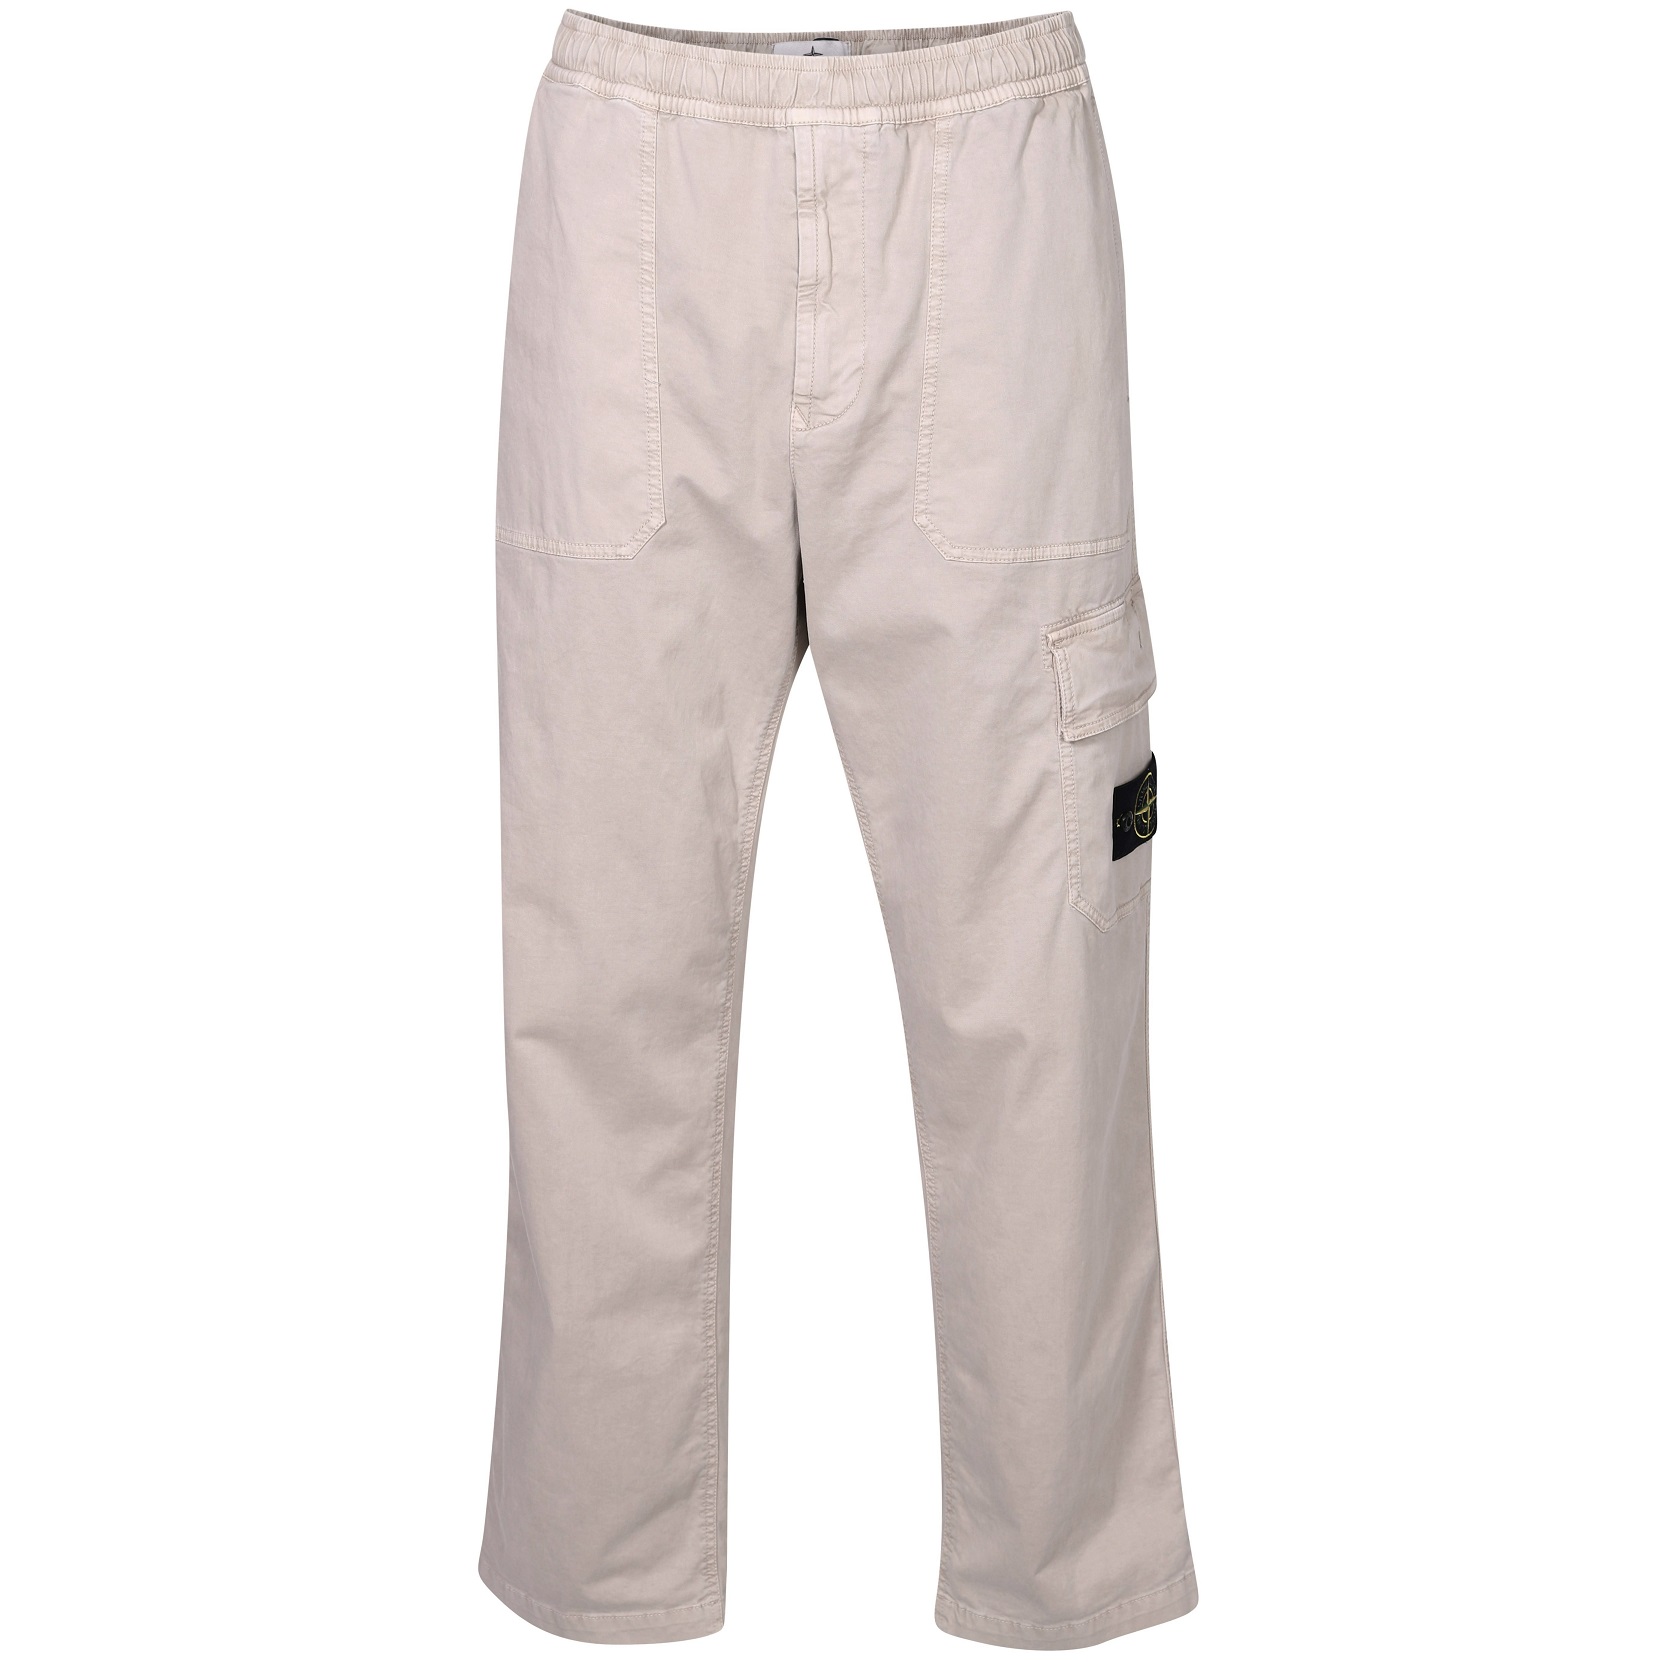 STONE ISLAND Loose Cargo Pant in Beige